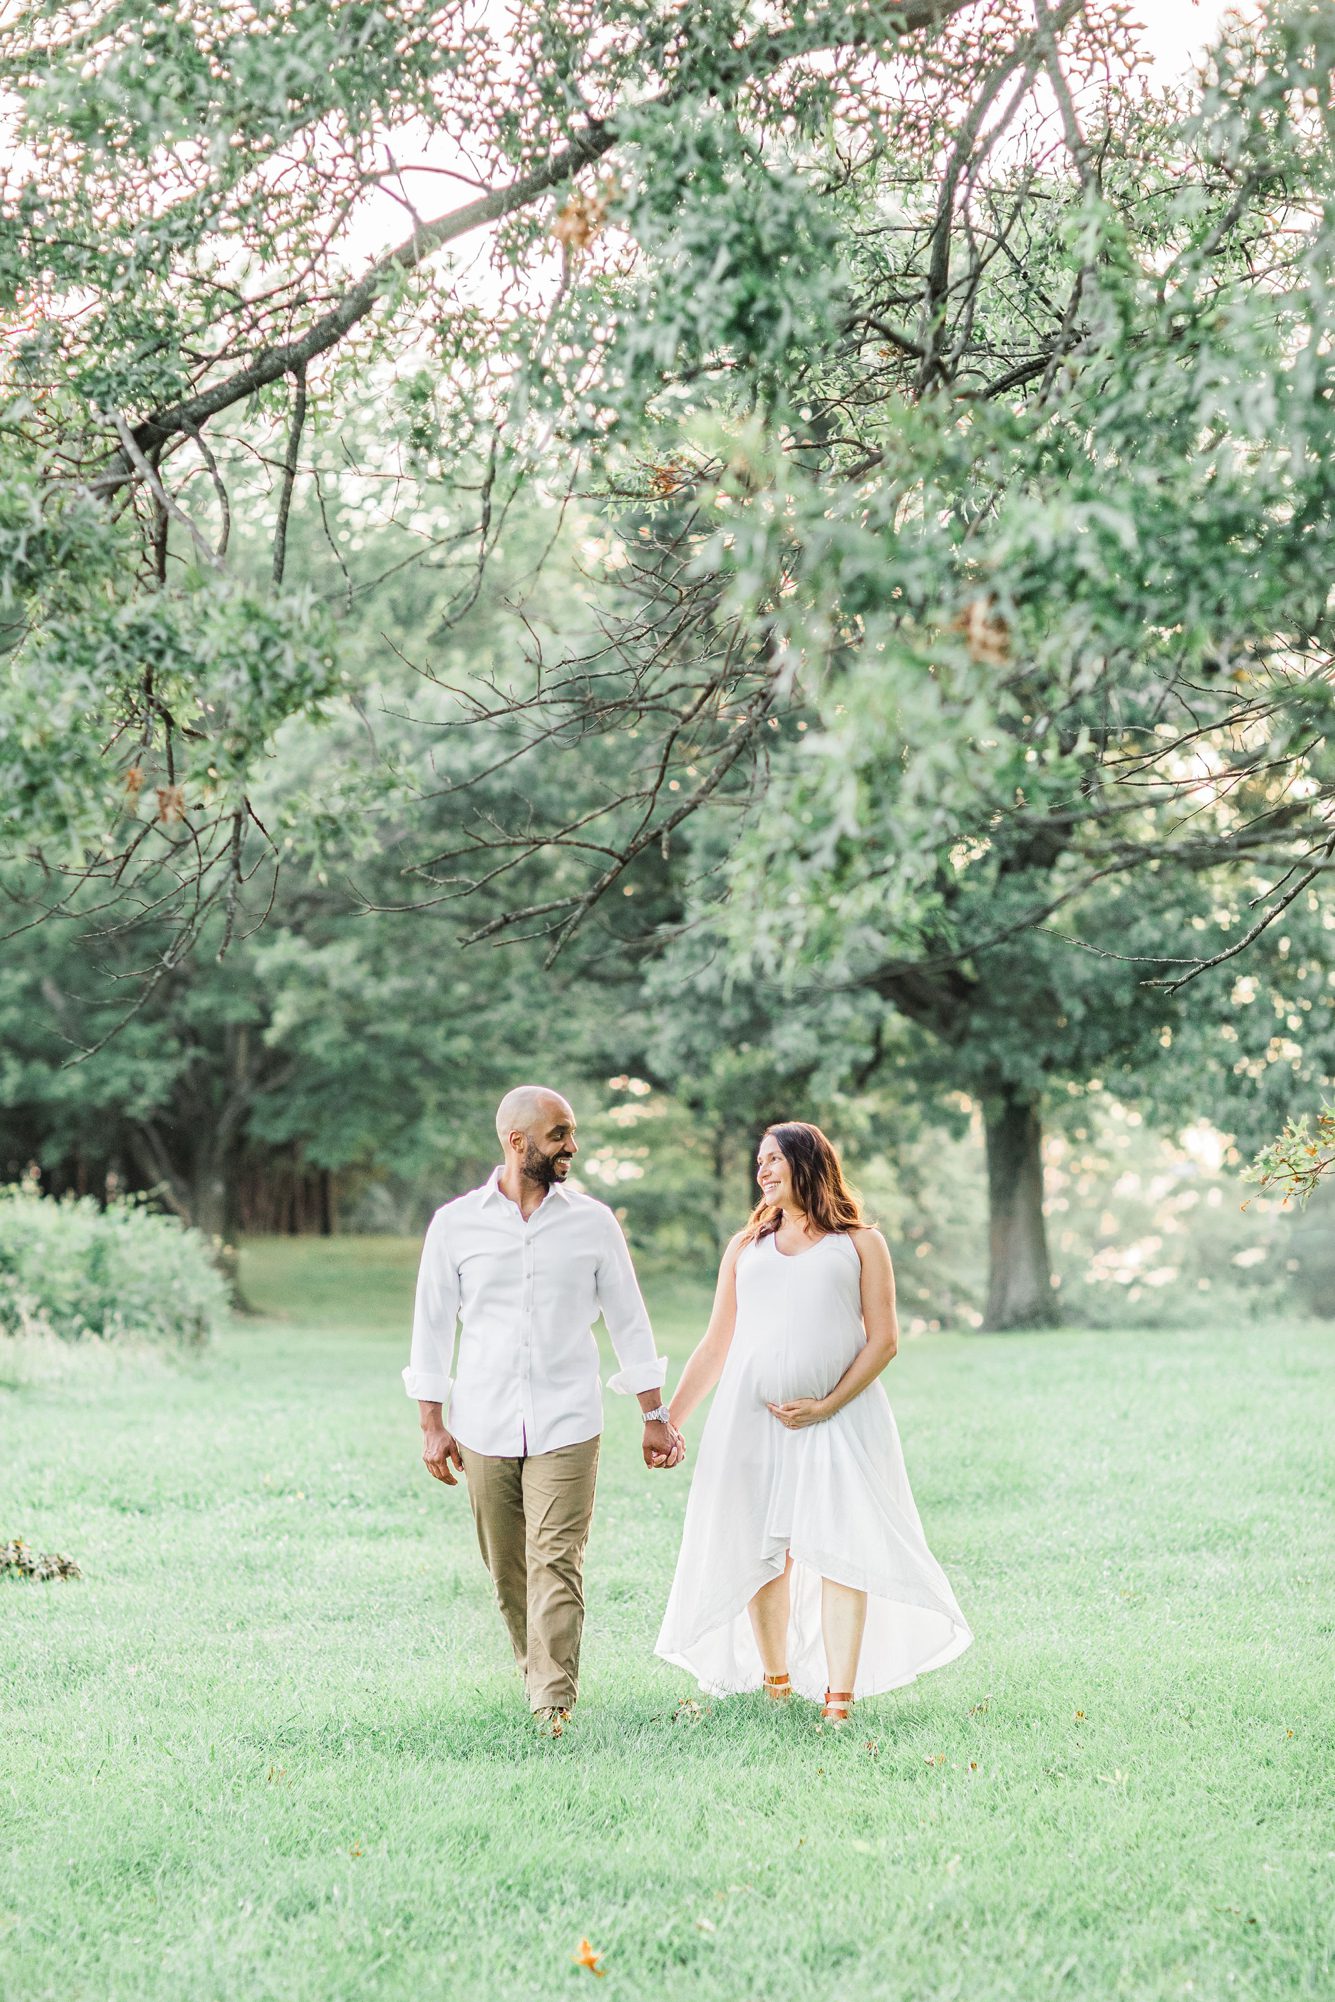 Mom and Dad walking during maternity session. Photo by Washington DC photographer, LRG Portraits